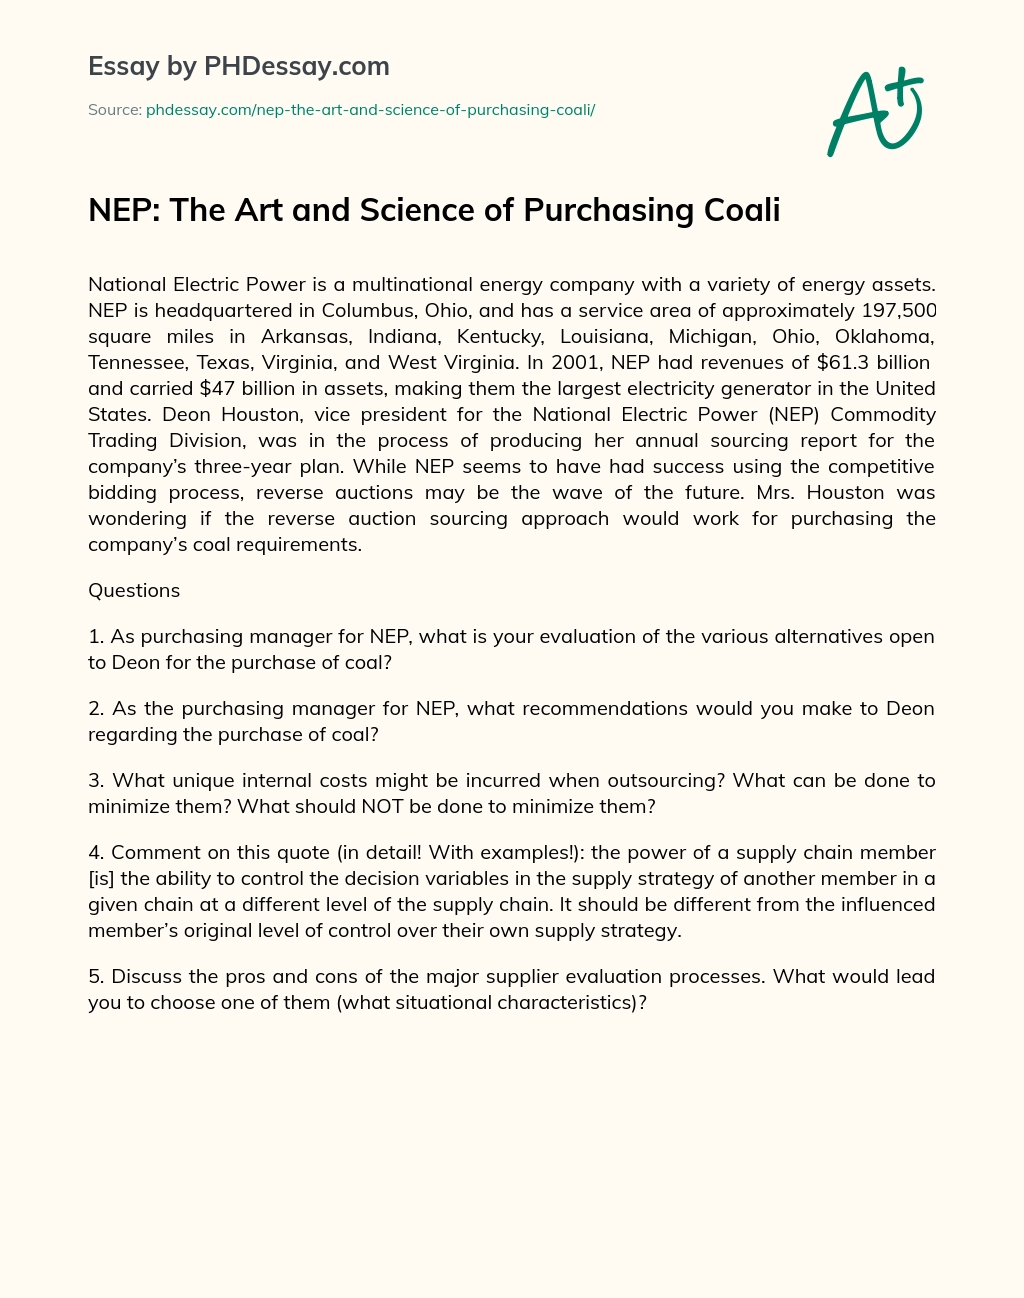 NEP: The Art and Science of Purchasing Coali essay